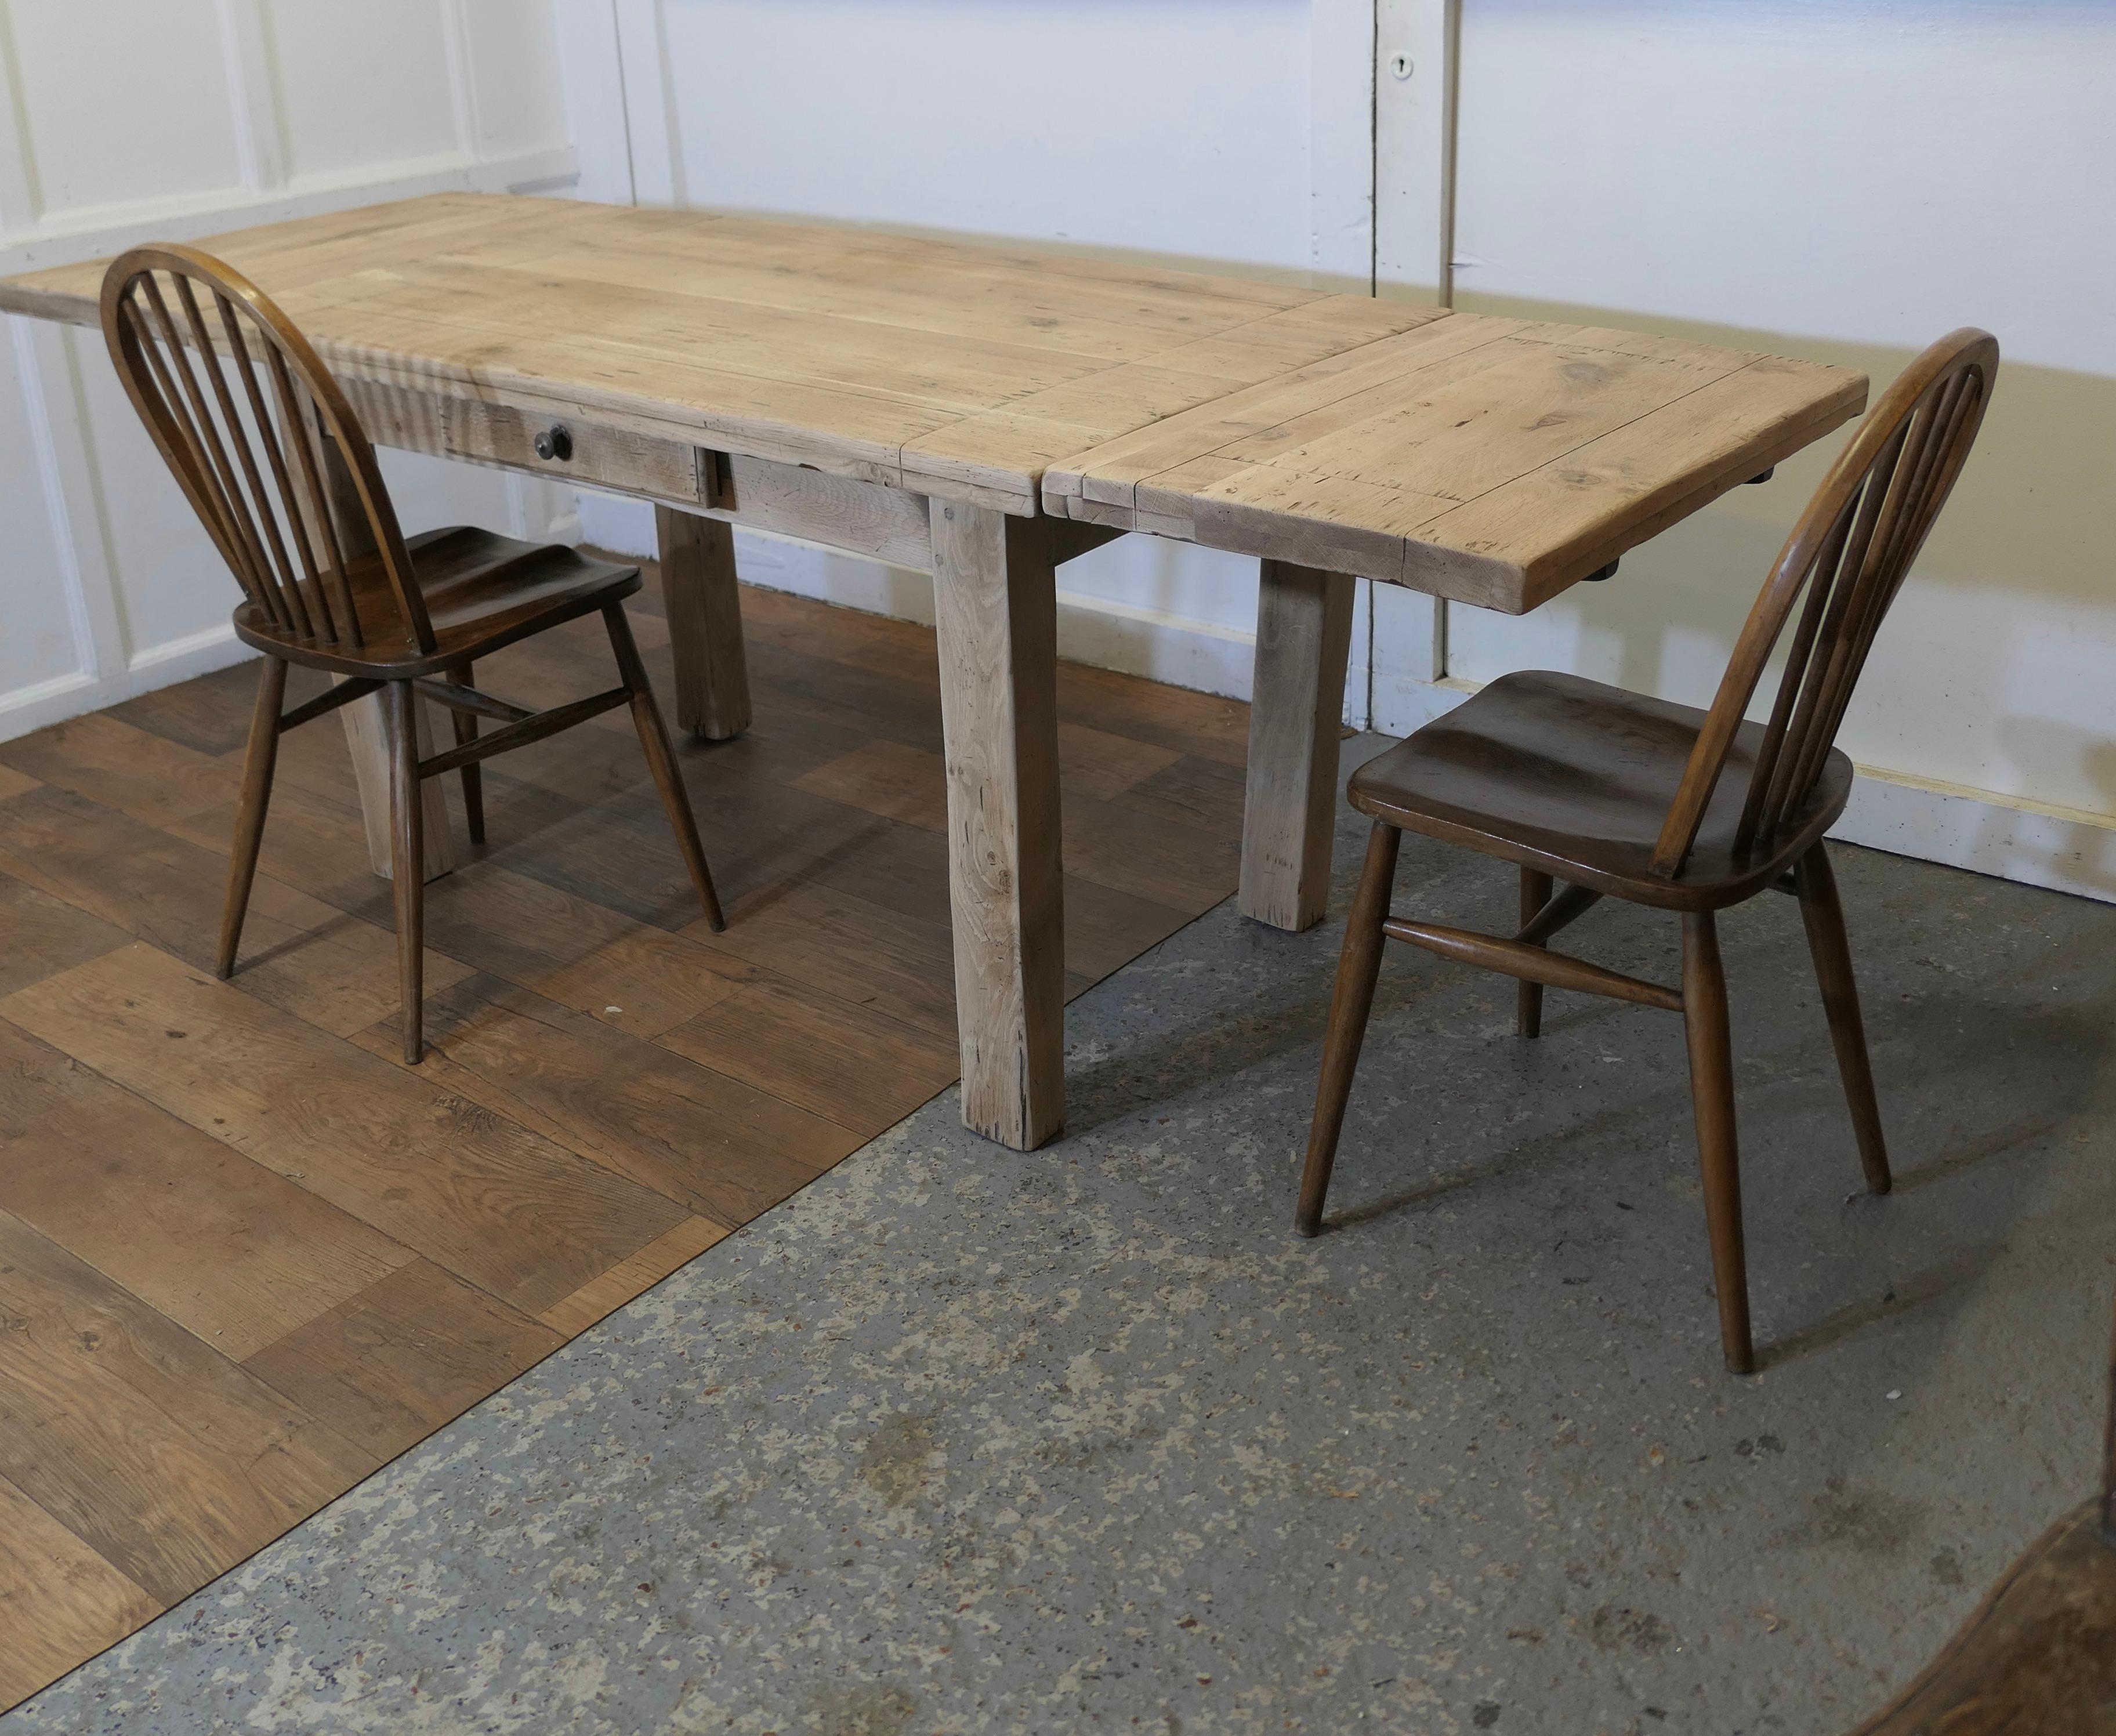 19th Century Sun Bleached Oak 7ft Extending Dining Table  The table is very heavy an solid  For Sale